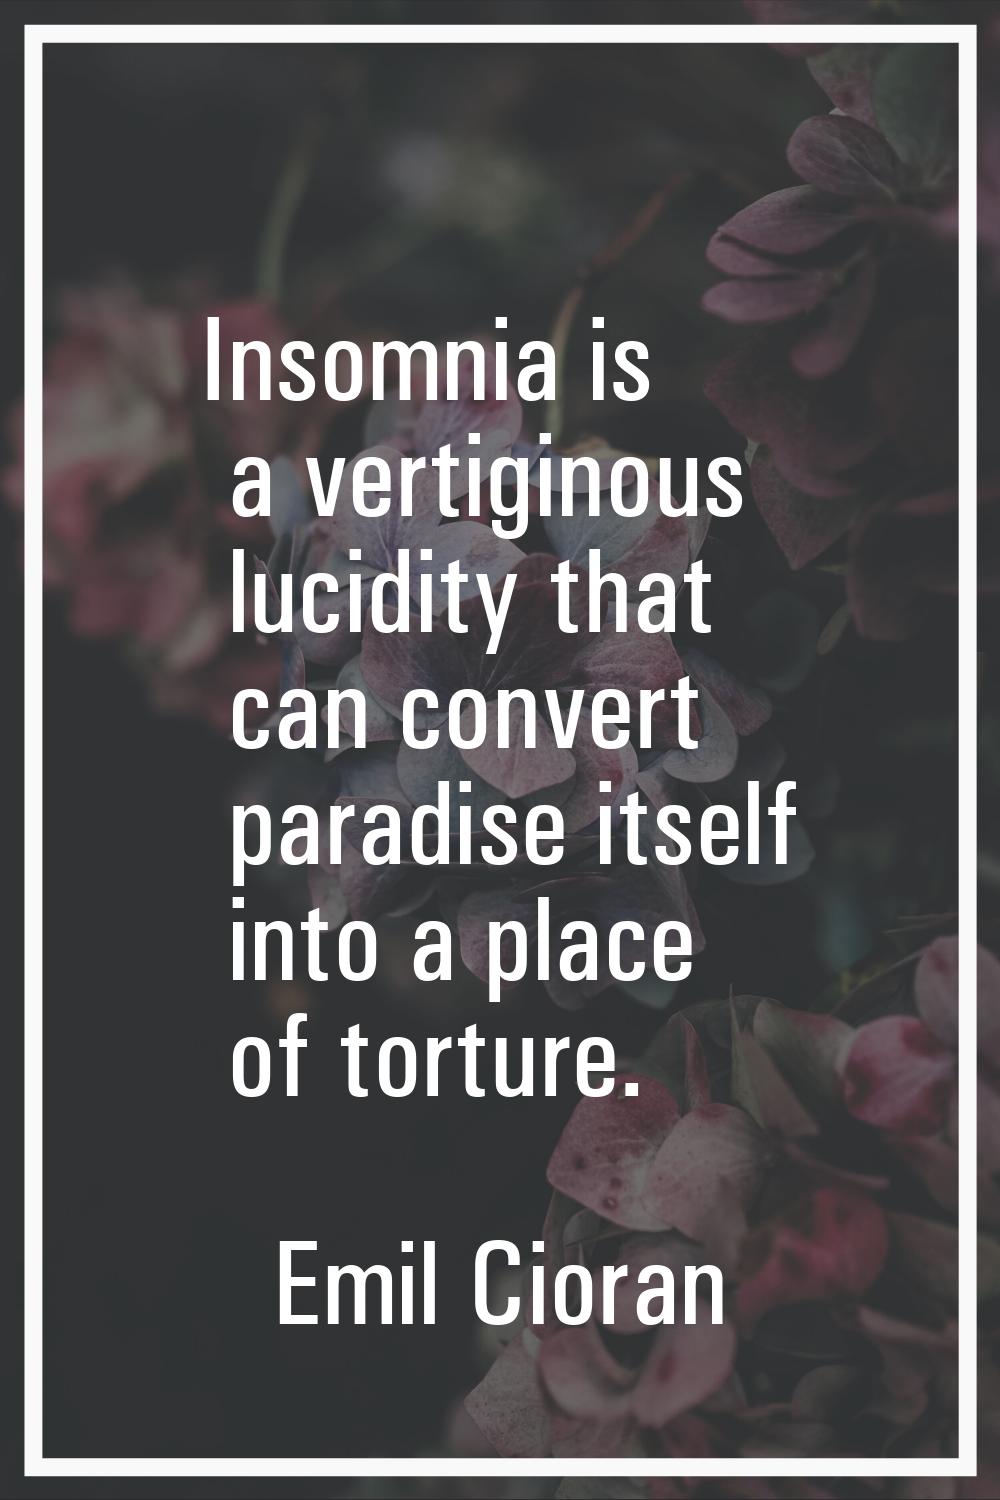 Insomnia is a vertiginous lucidity that can convert paradise itself into a place of torture.